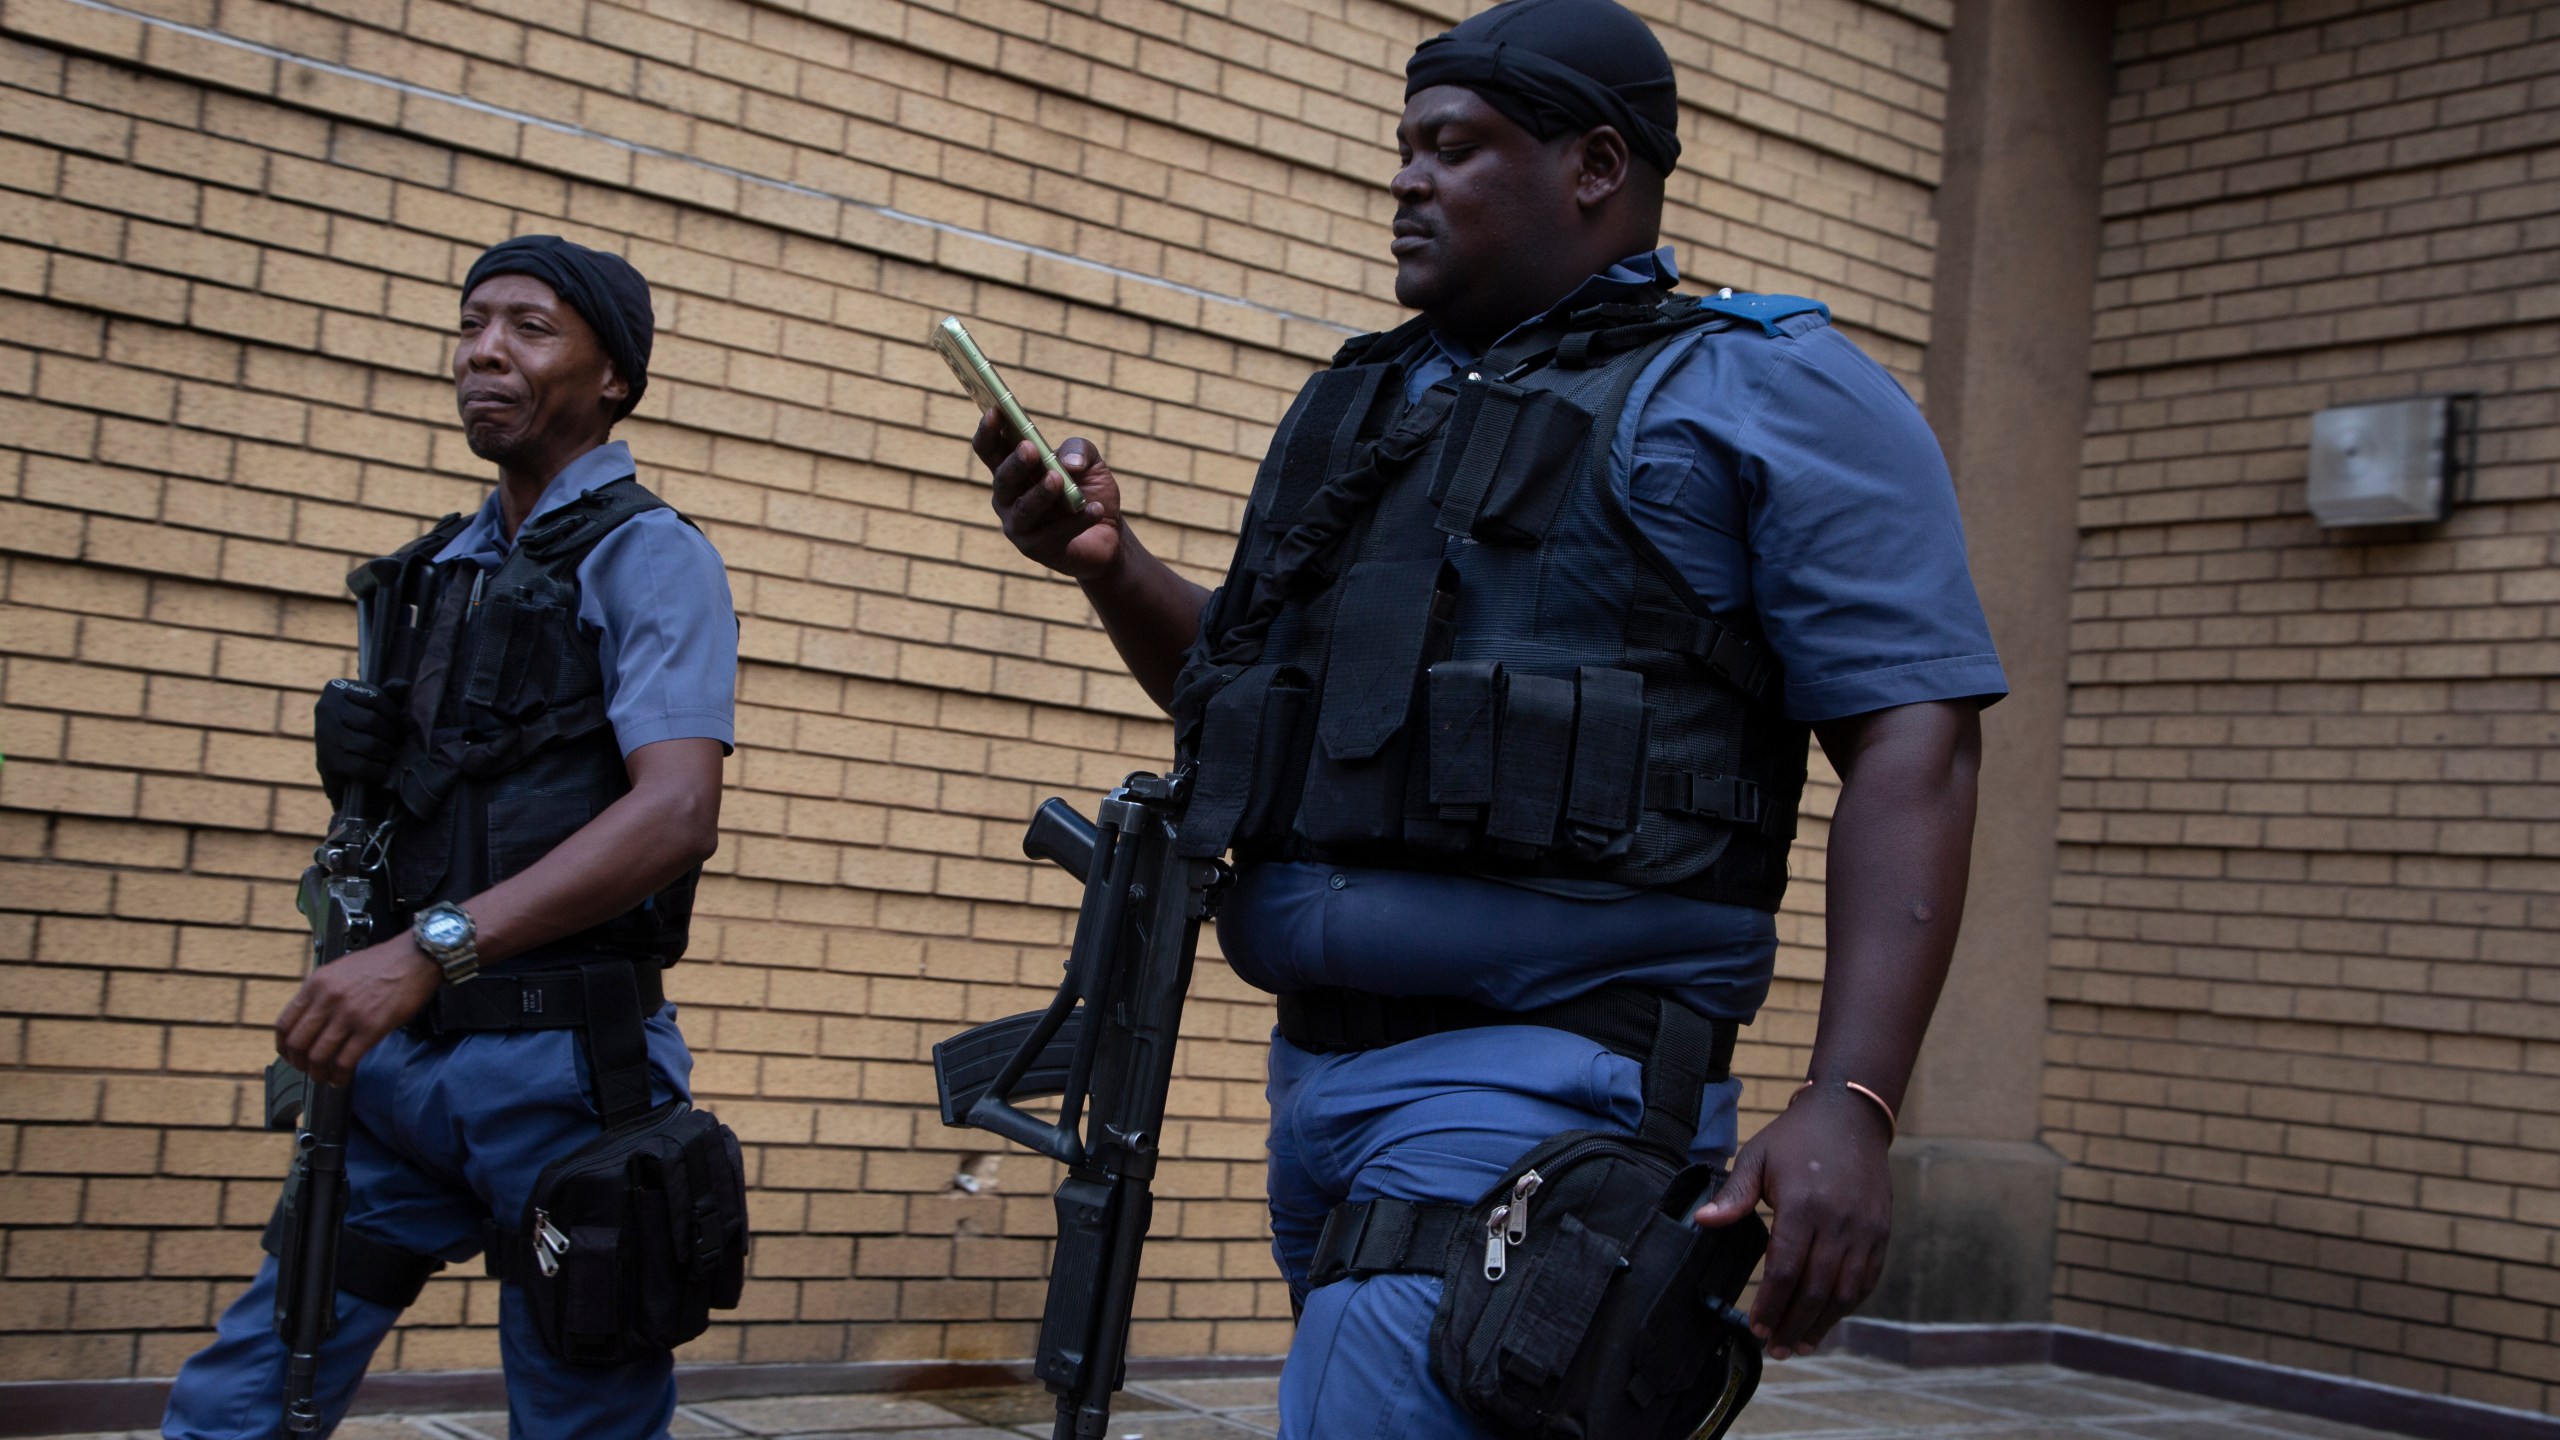 Armed police patrol outside the High Court in Pretoria, South Africa, Monday March 25, 2024. South African prosecutors say they intend to charge the Parliament speaker with corruption. They allege she took $135,000 and a wig in bribes from an unnamed person over a three-year period while she was defense minister. (AP Photo/Denis Farrell)